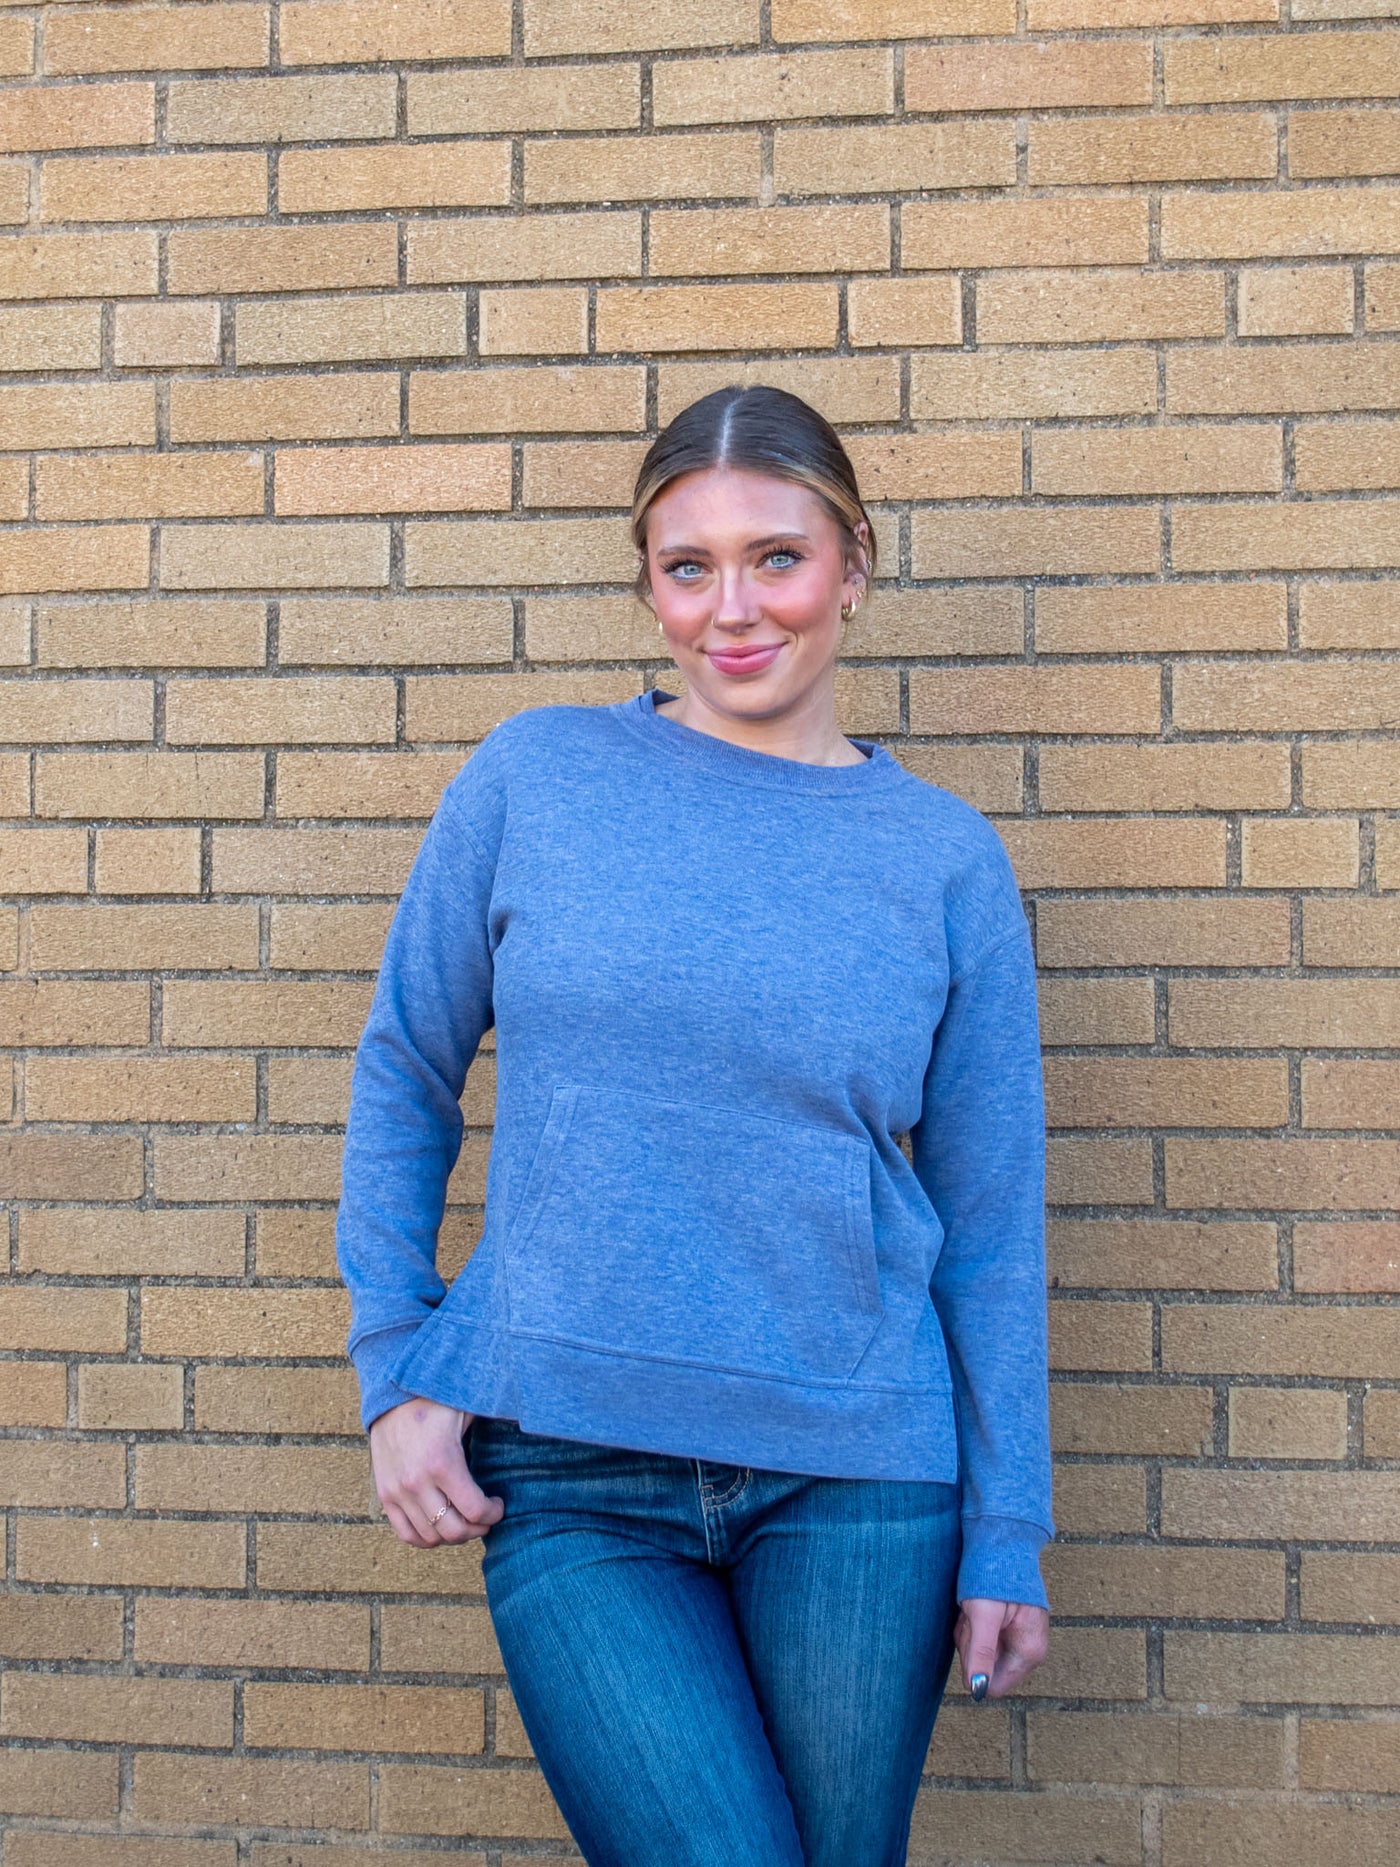 A model wearing a blue crewneck sweatshirt with a front pocket and side slits. The model has it paired with a dark wash jean.